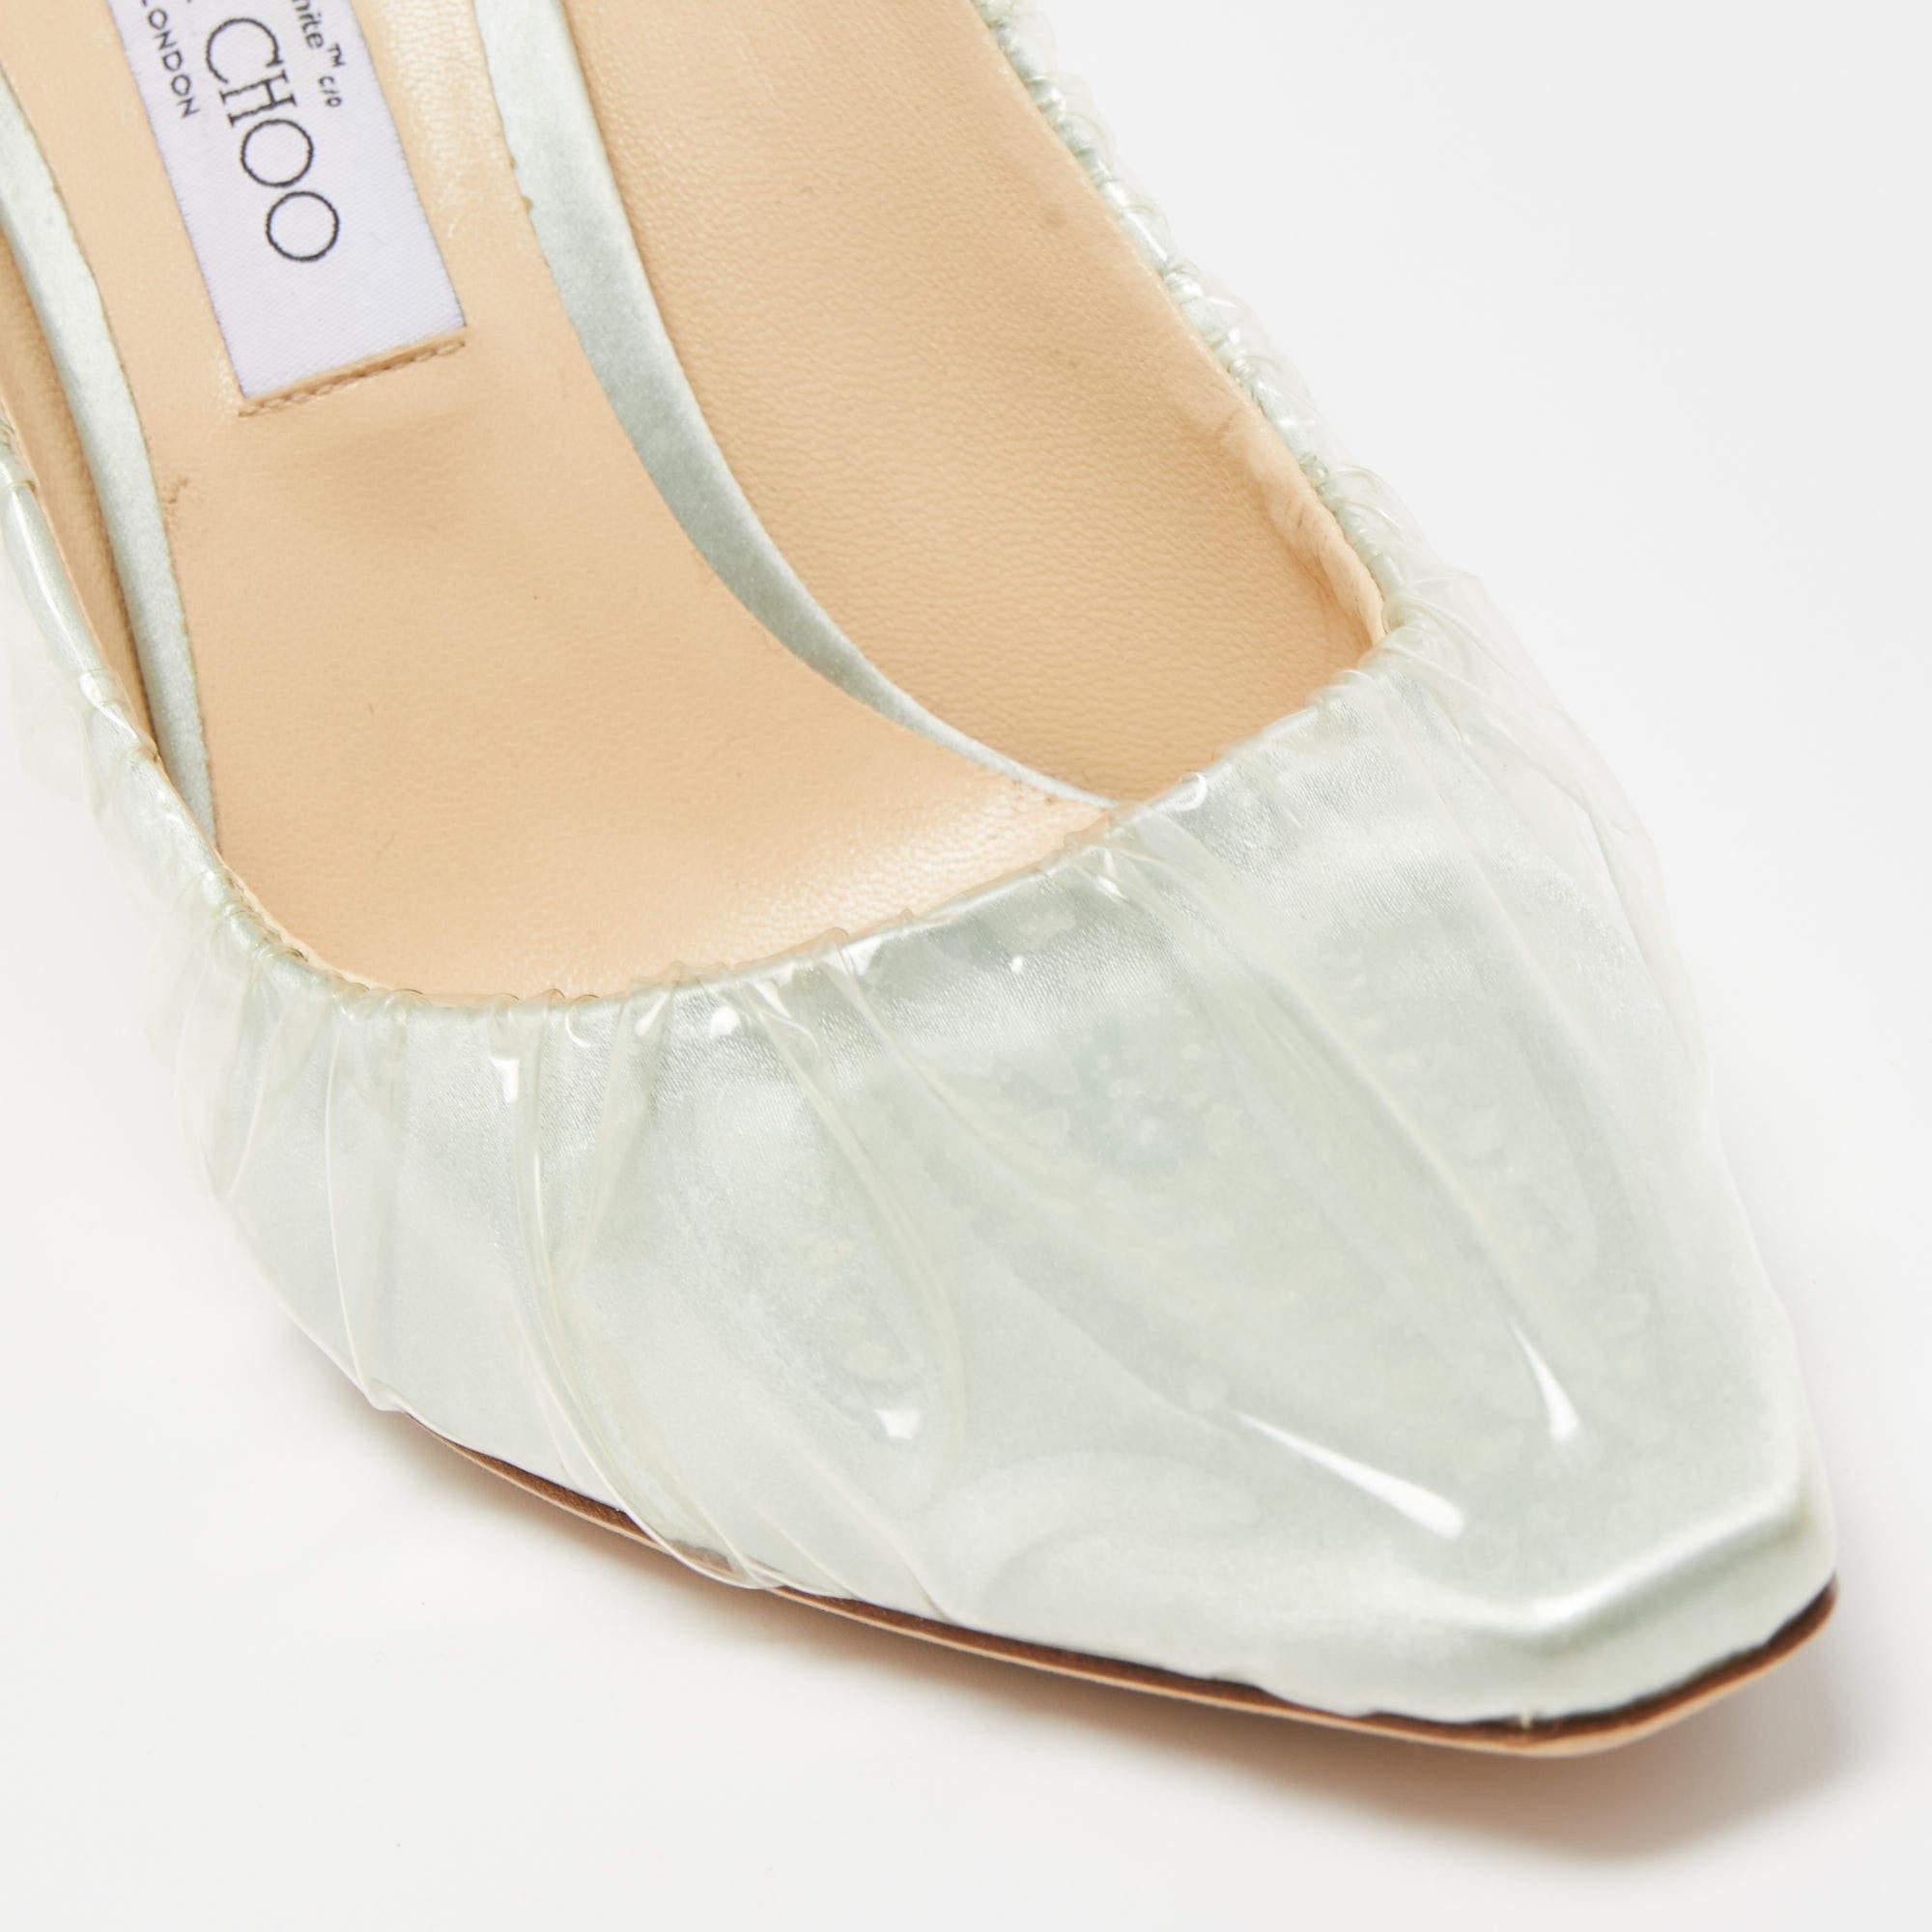 Jimmy Choo x Off-White Light Green Satin and Pleated PVC Anne Pumps Size 41 For Sale 3